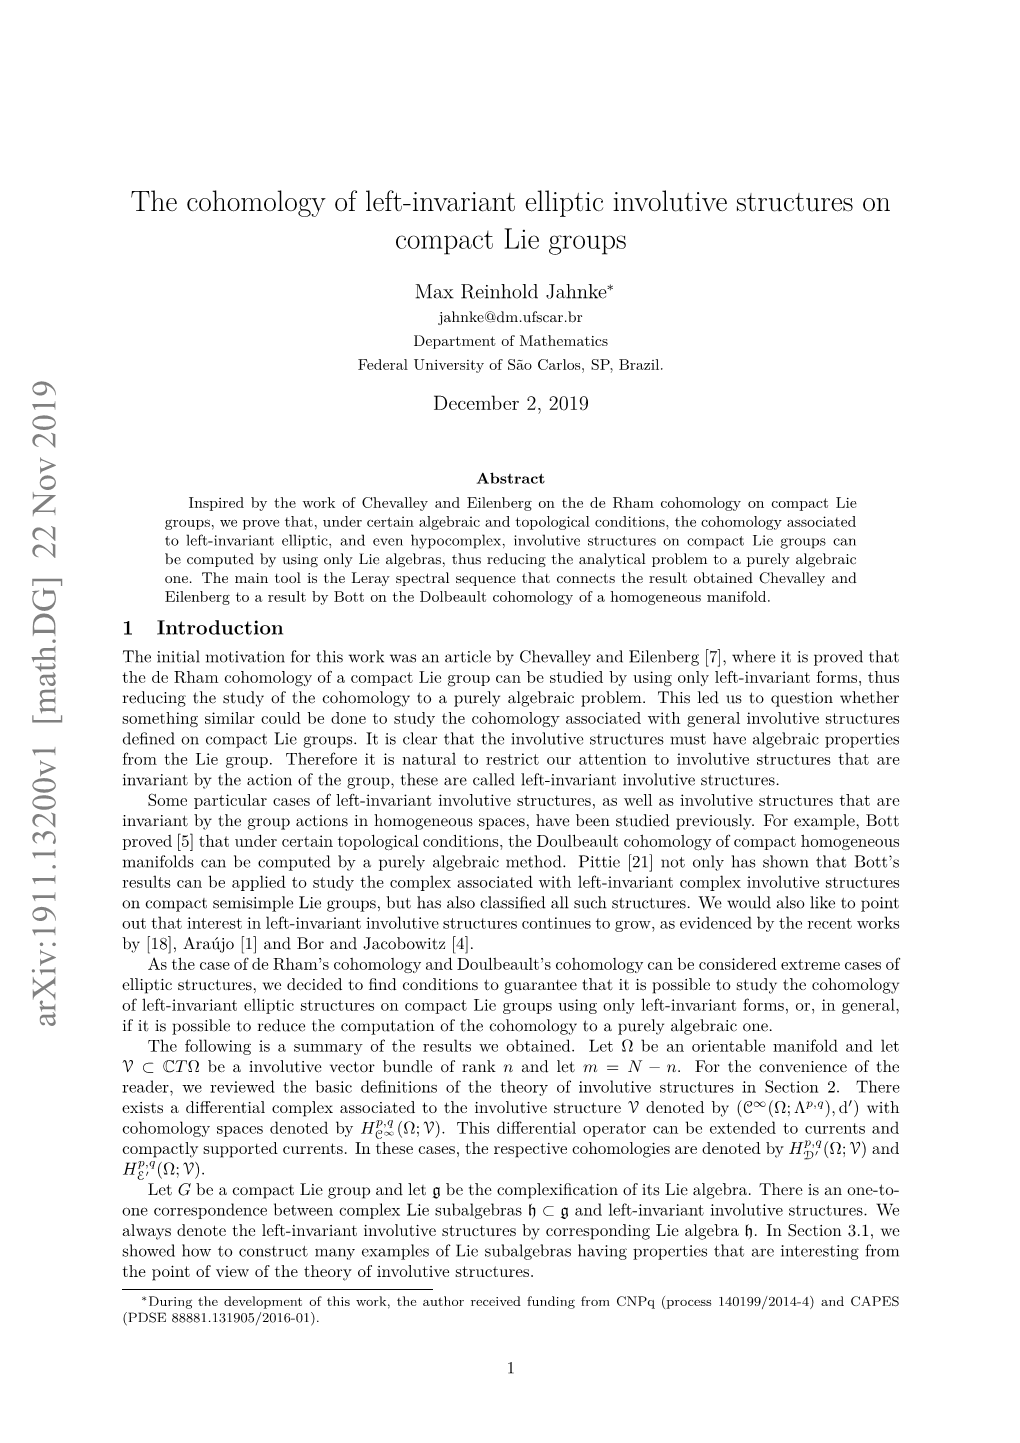 The Cohomology of Left-Invariant Elliptic Involutive Structures On